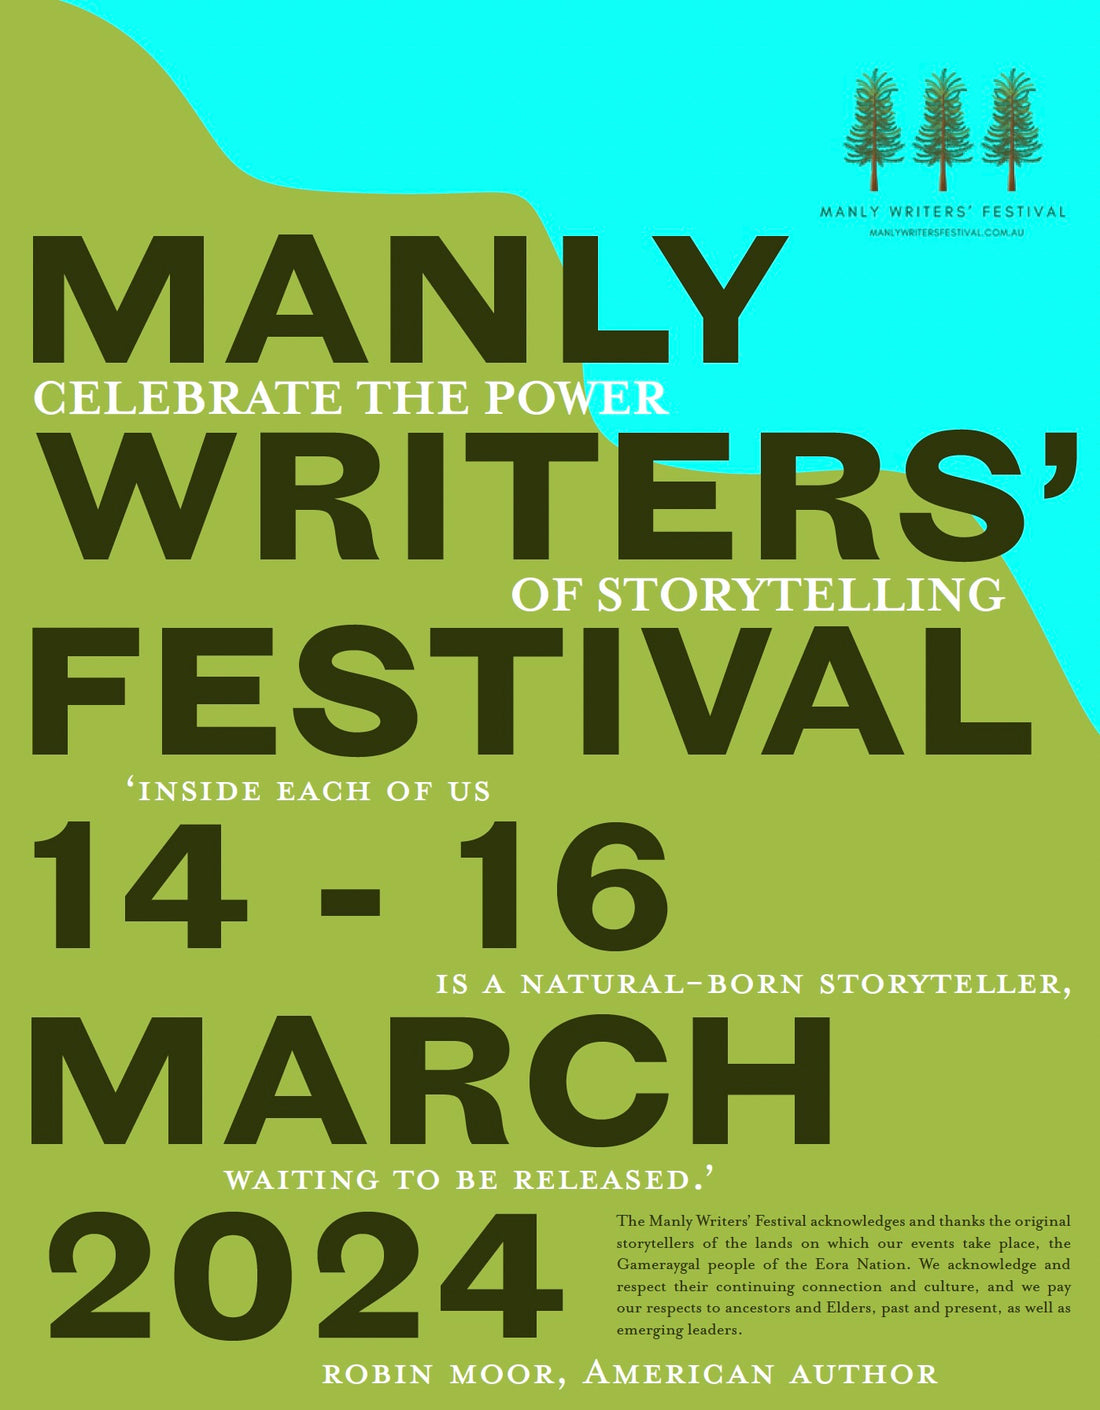 Announcing the Manly Writers' Festival program